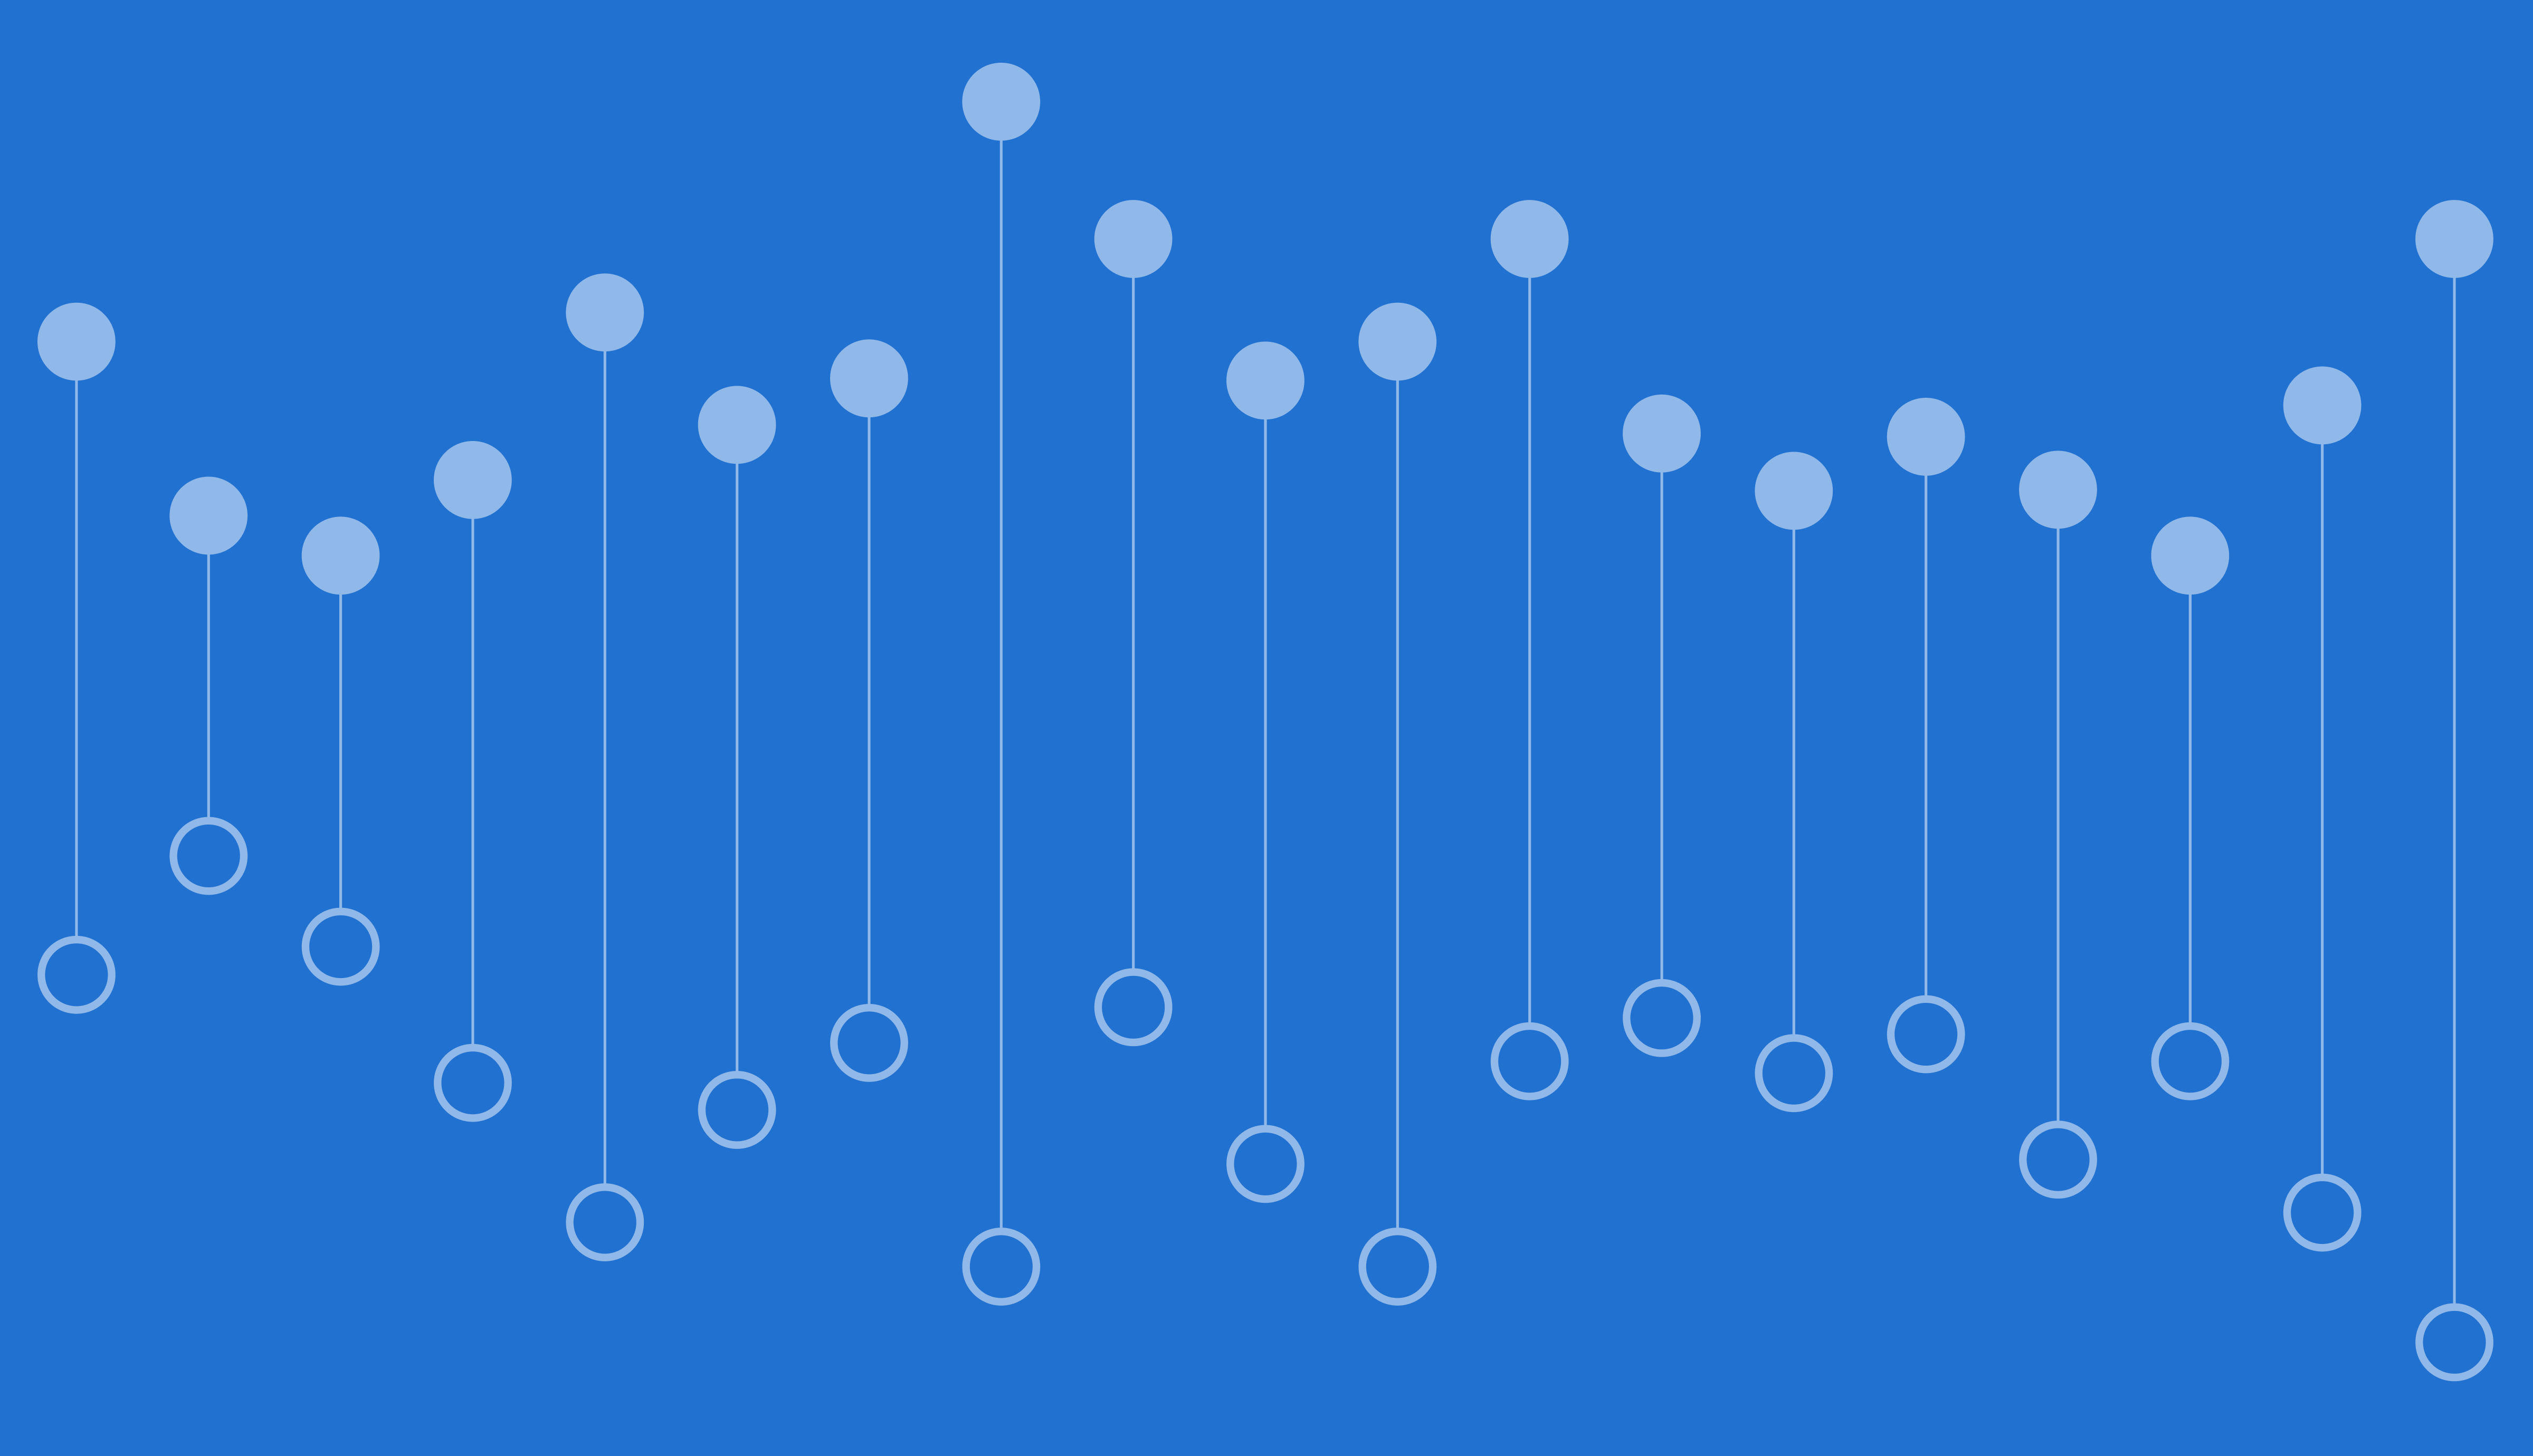 Abstract chart with vertical line segments against a blue background